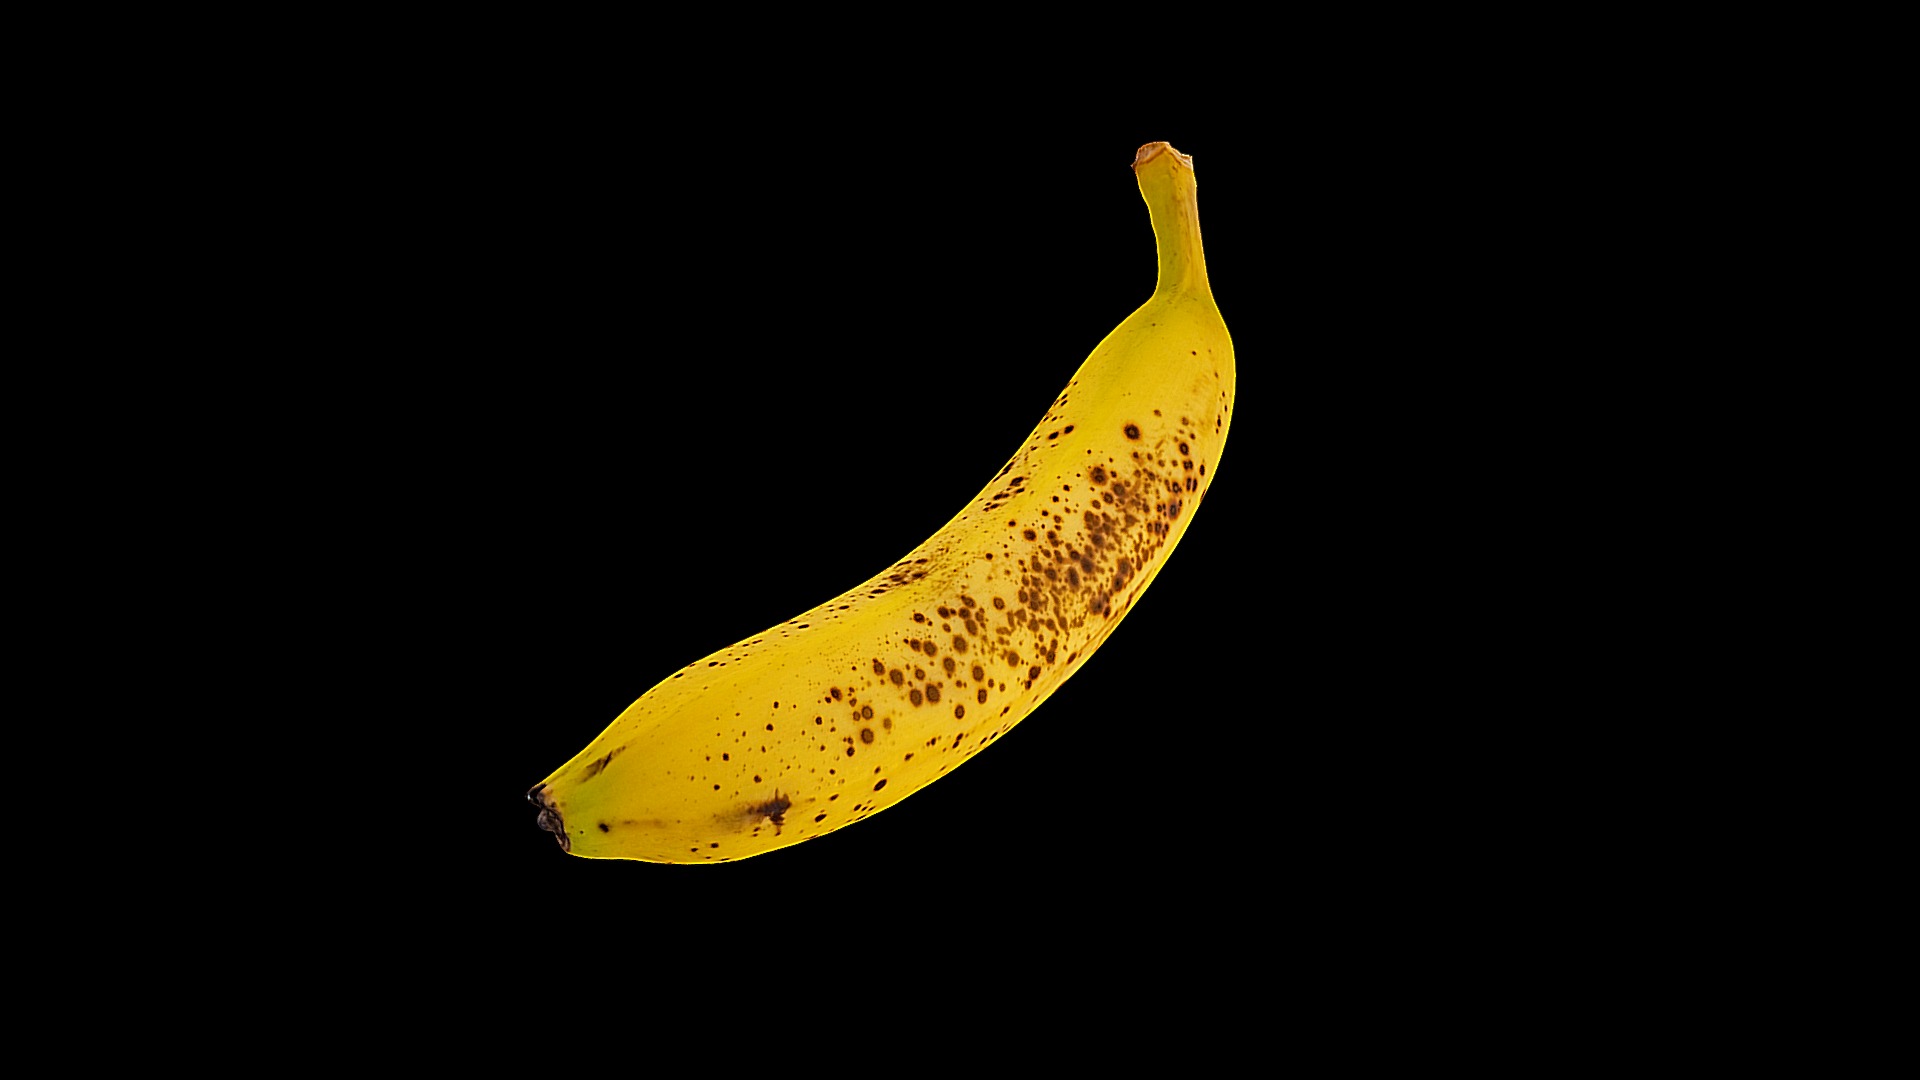 3D model Yet another banana fruit - This is a 3D model of the Yet another banana fruit. The 3D model is about a banana with a black background.